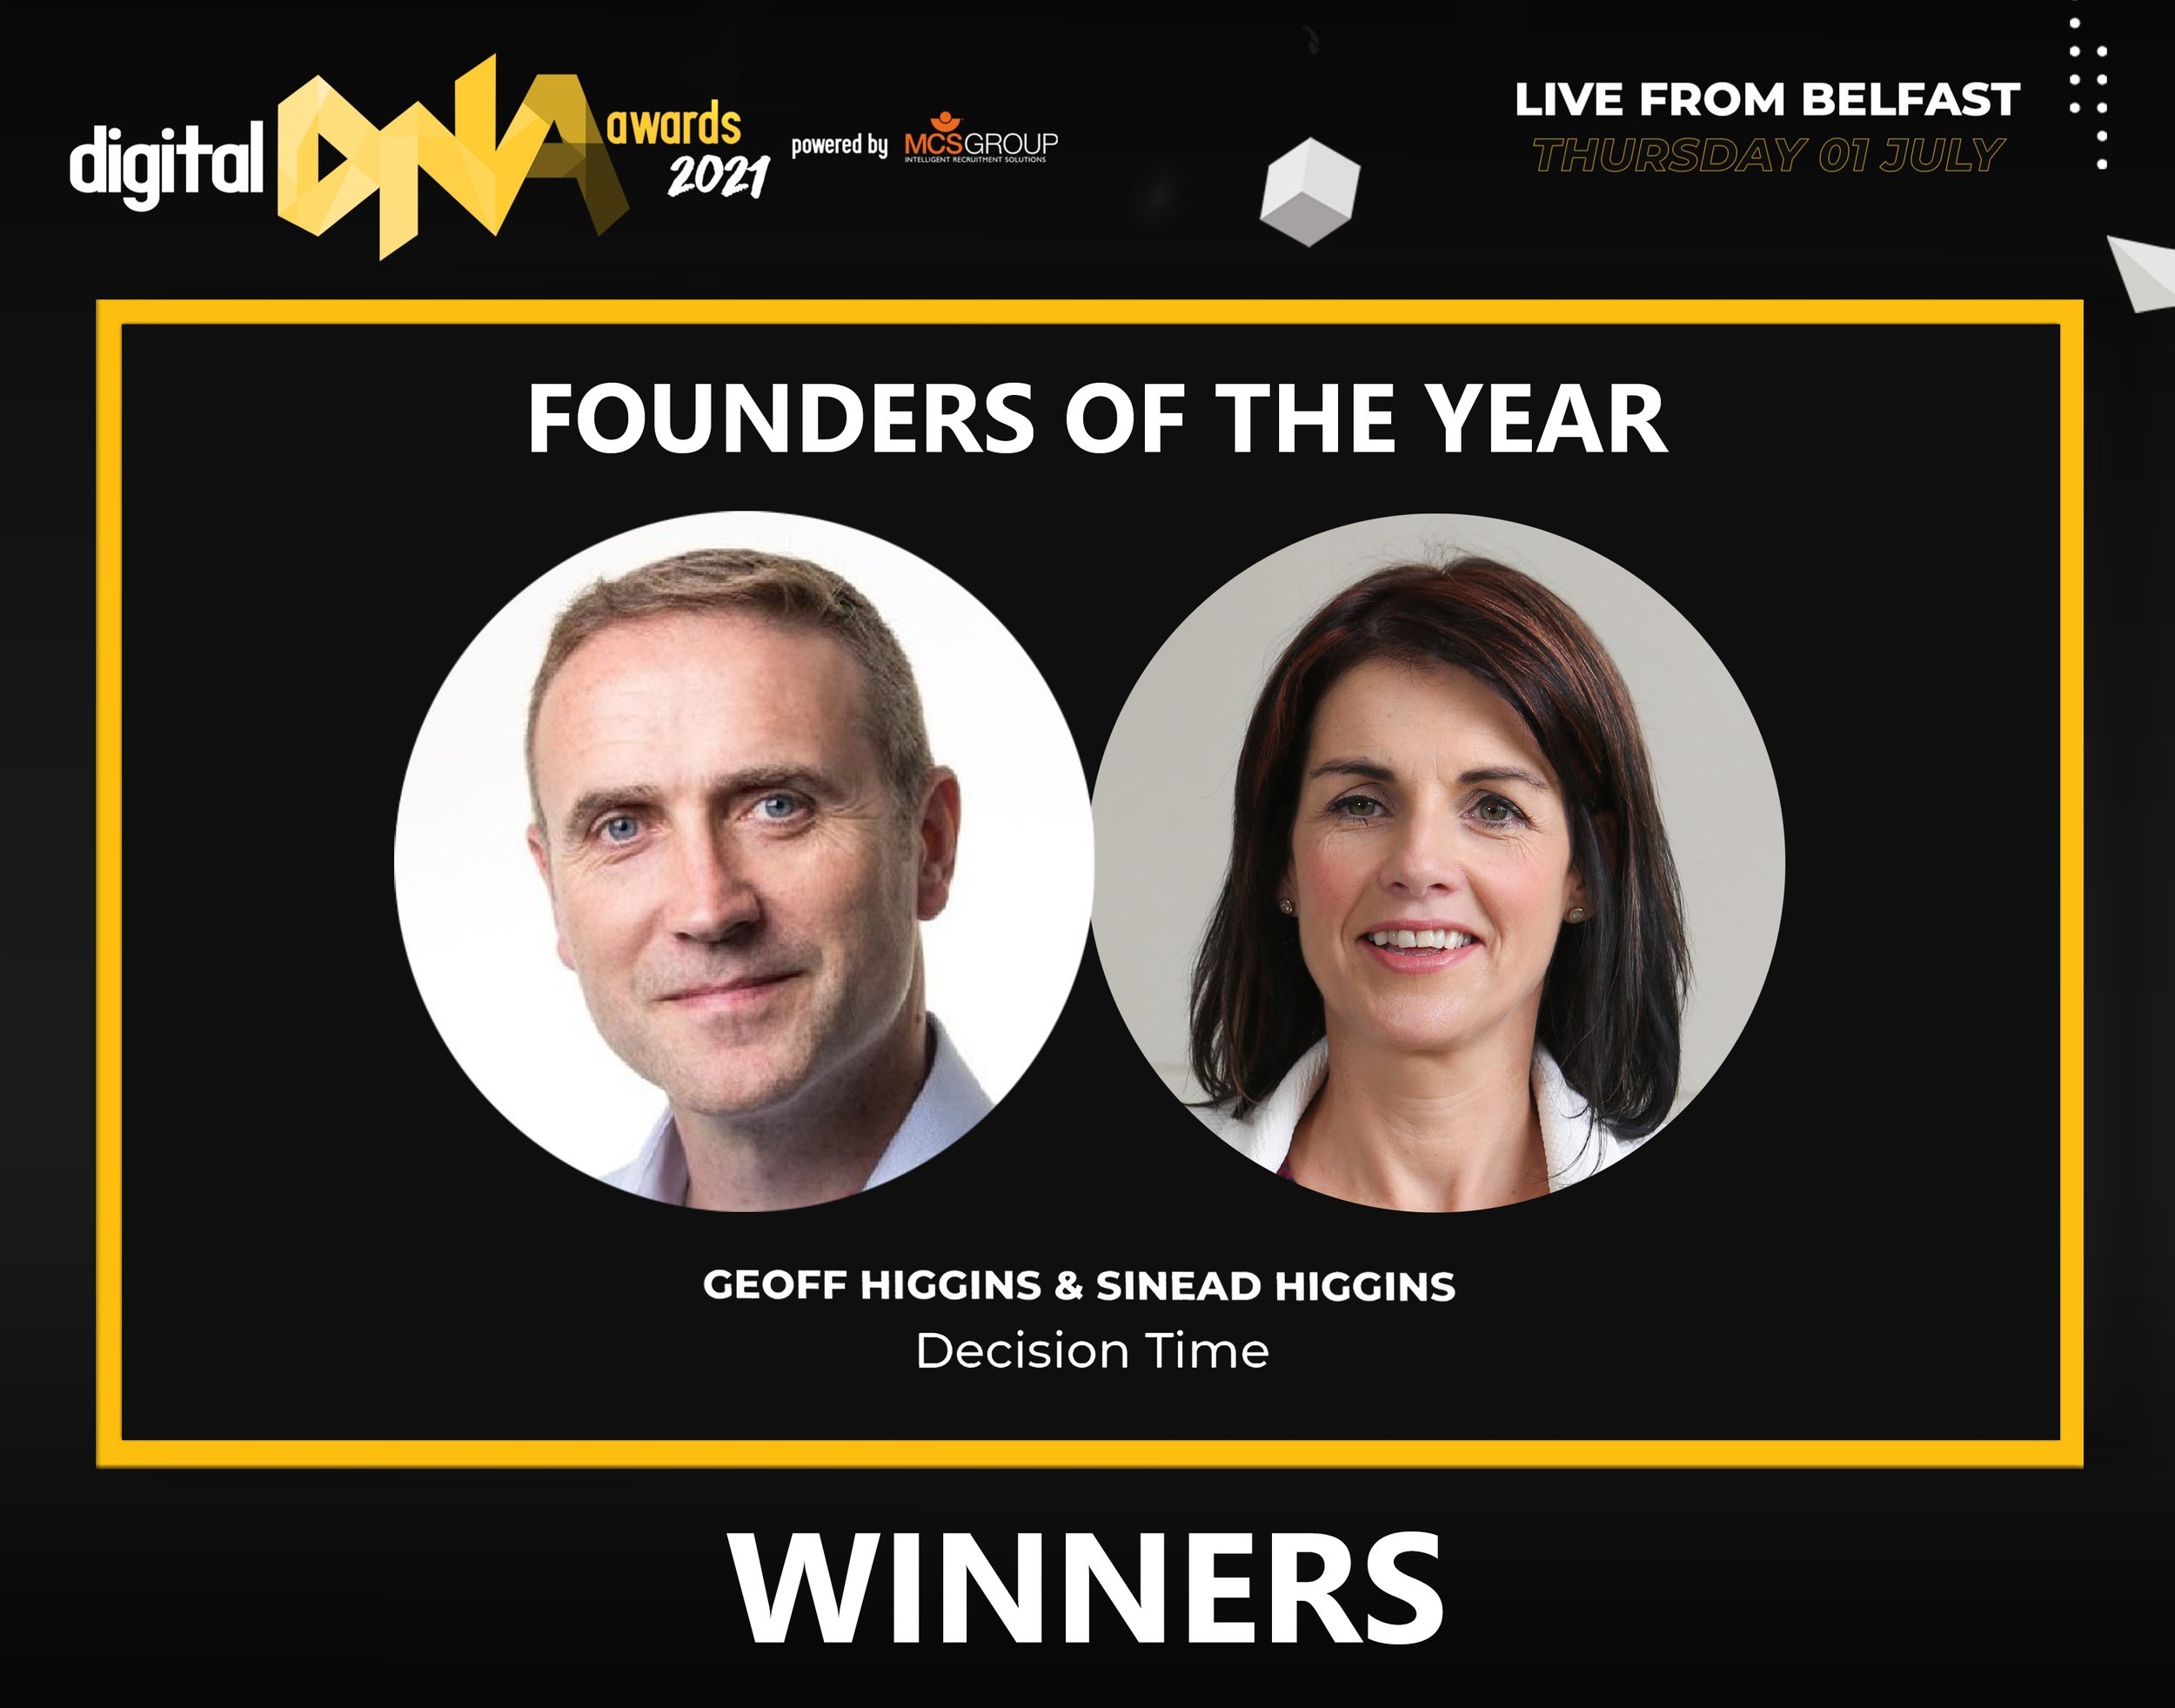 We won Founders of the Year in the Digital DNA awards